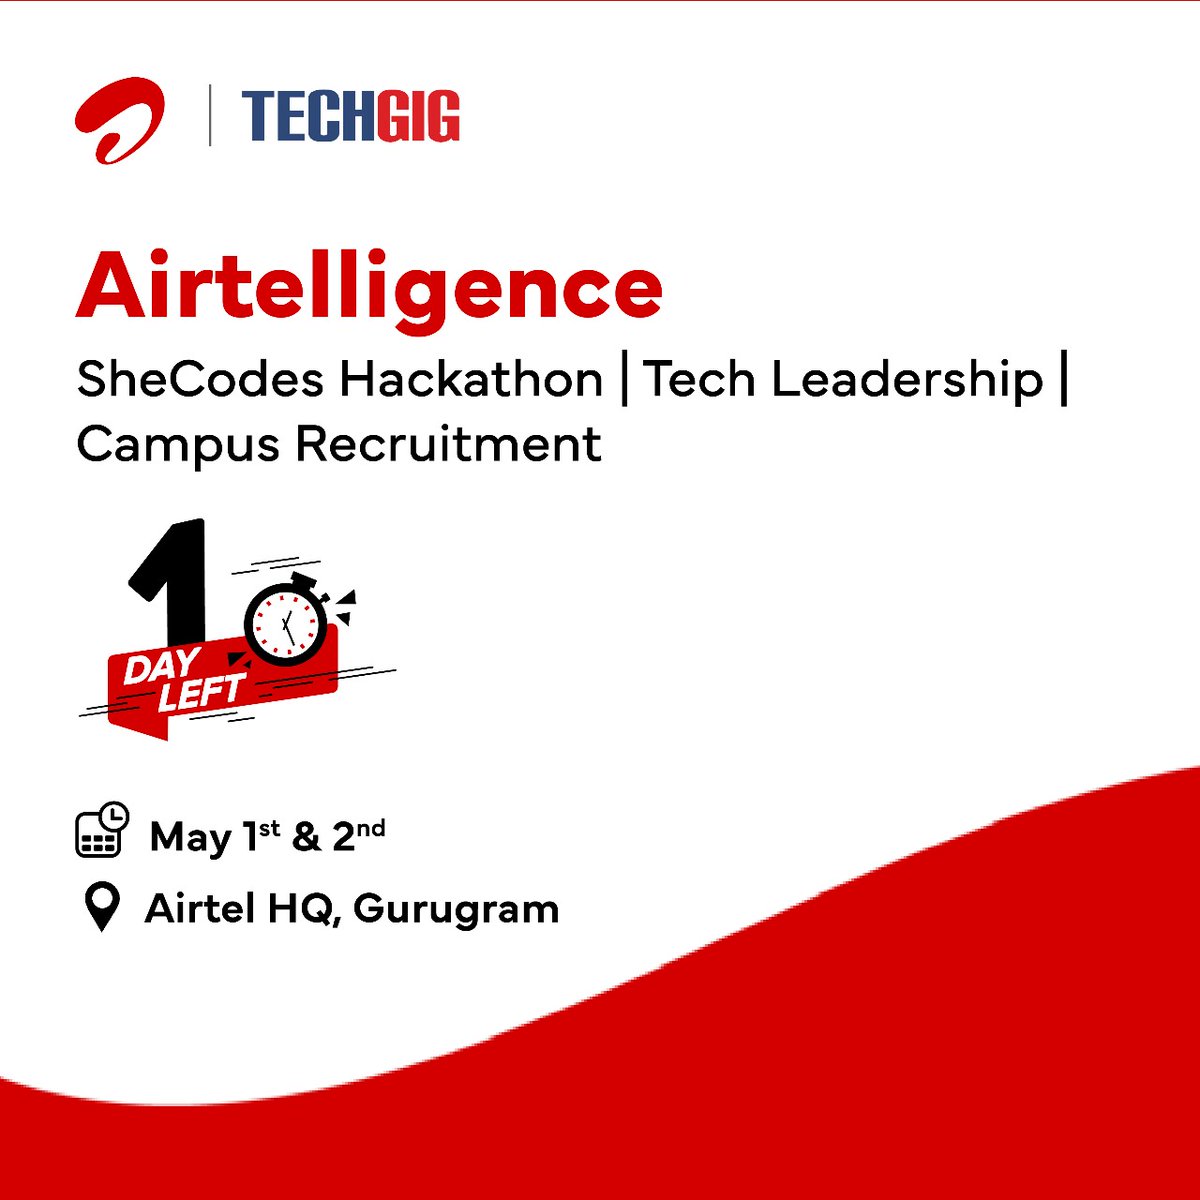 Gear up!⏰ Airtelligence by @airtelindia to bring insightful Tech Leadership talks and the finale of the SheCodes Hackathon at Airtel HQ starting tomorrow. #BeLimitless

#SheCodes #TechDiscussions #CareerOpportunities